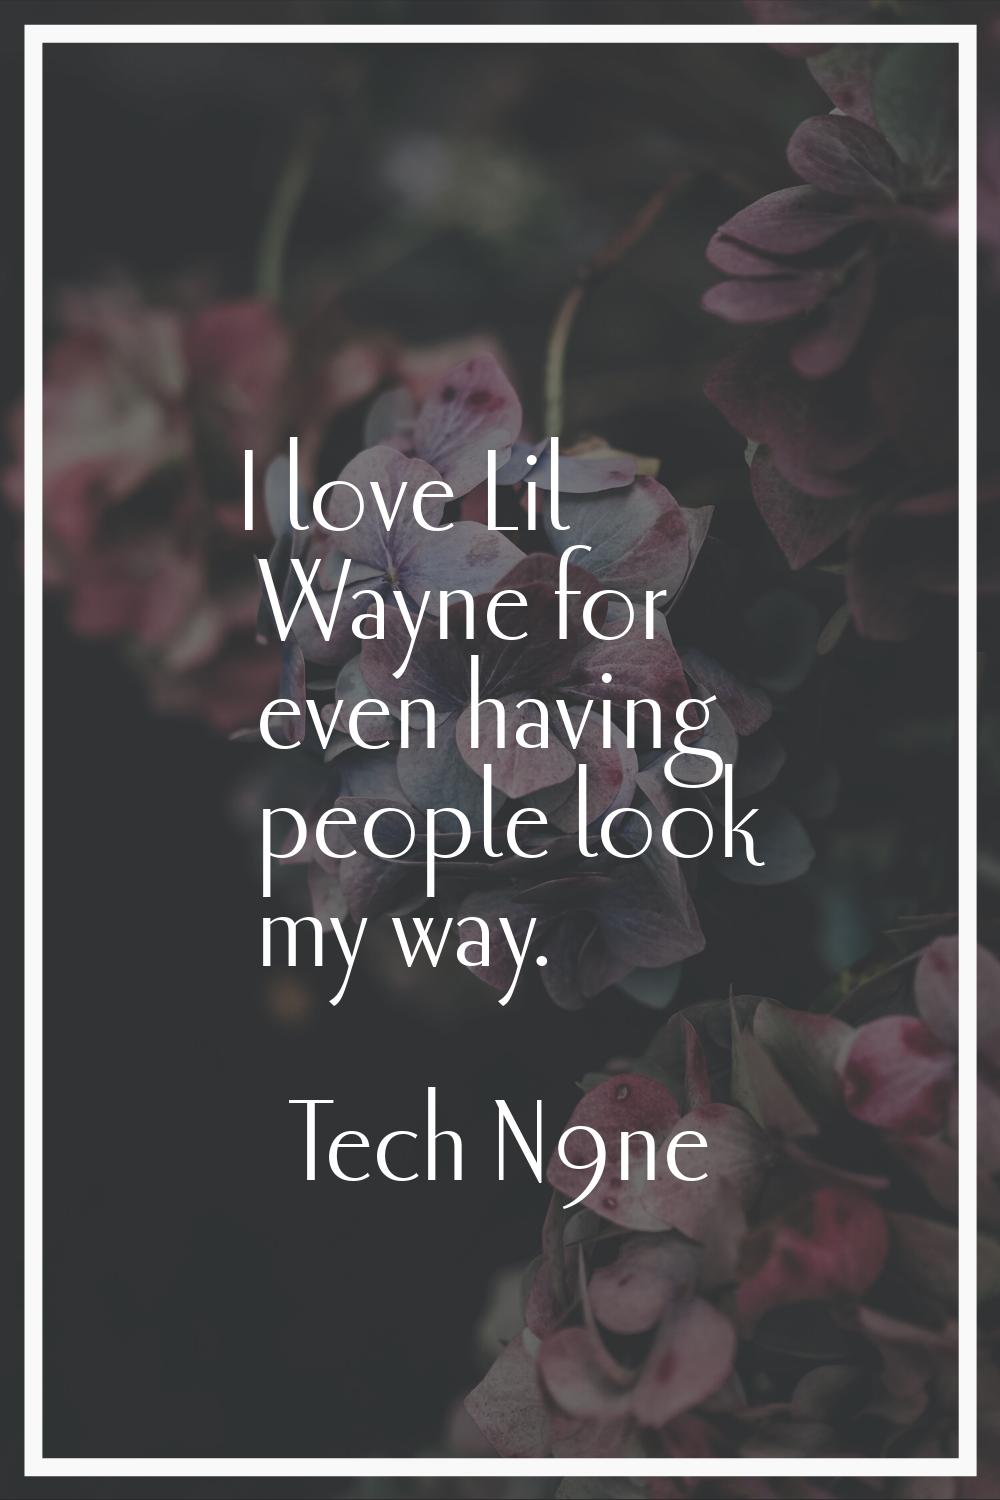 I love Lil Wayne for even having people look my way.